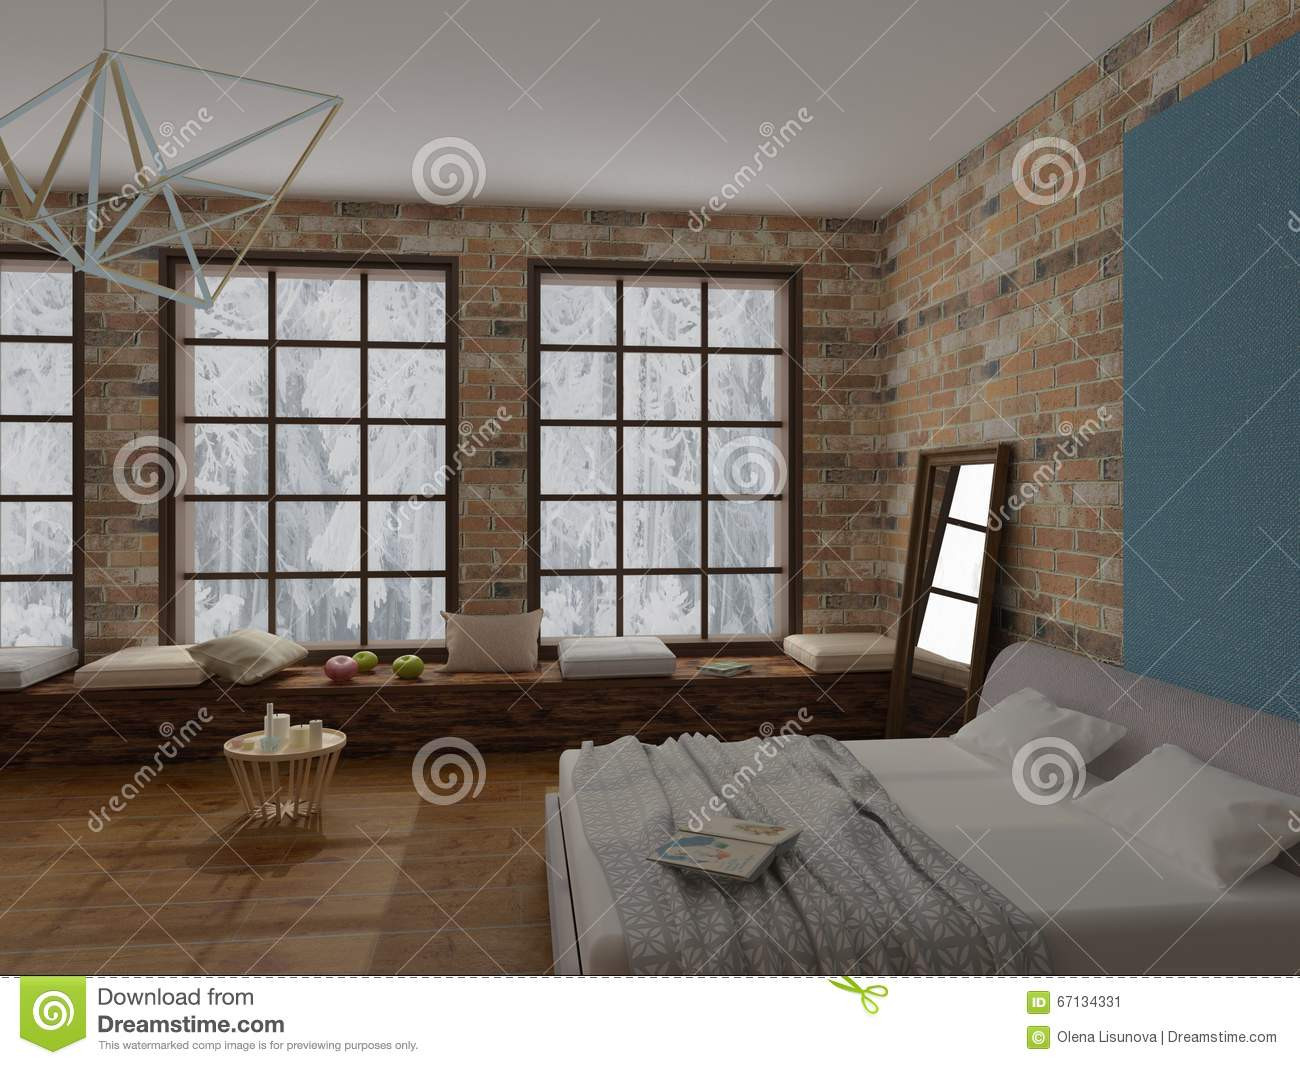 30 Great Hardwood Floors White Walls 2024 free download hardwood floors white walls of rendering of cozy interior of bedroom in loft style with brick wall for rendering of cozy interior of bedroom in loft style with brick wall soft bed hardwood f